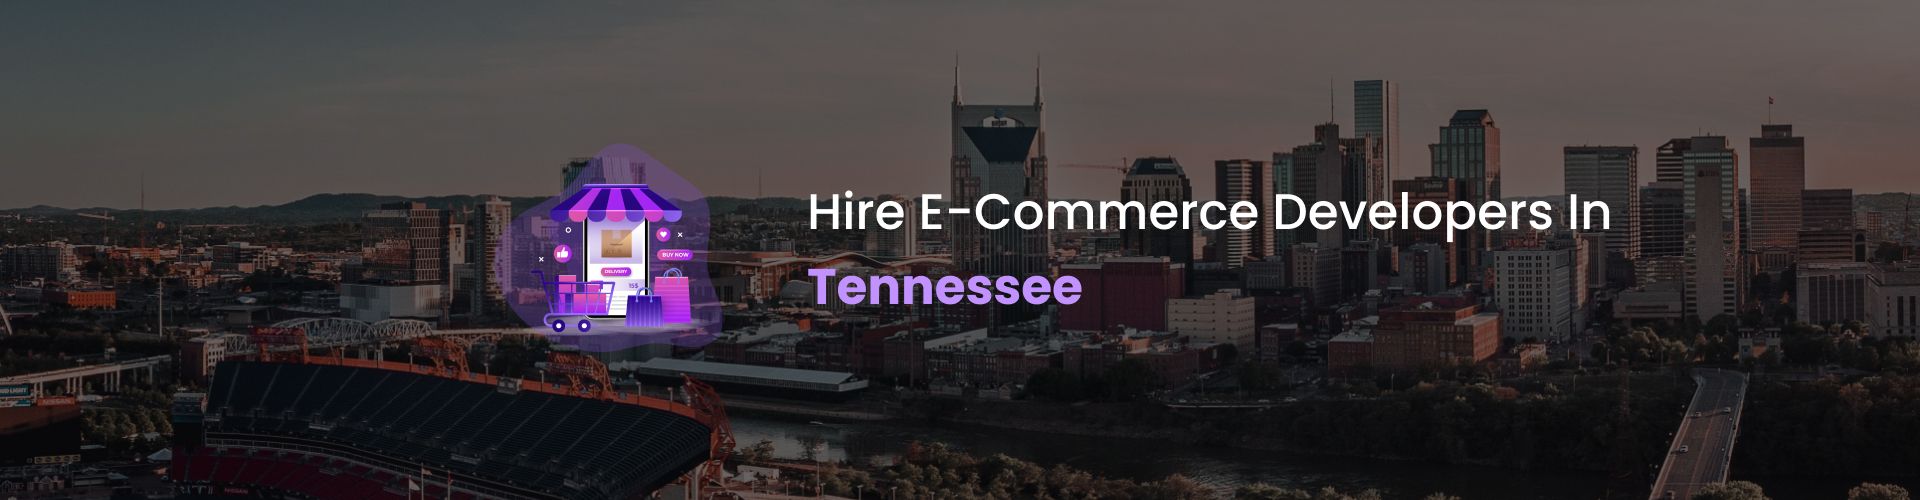 hire ecommerce developers in tennessee